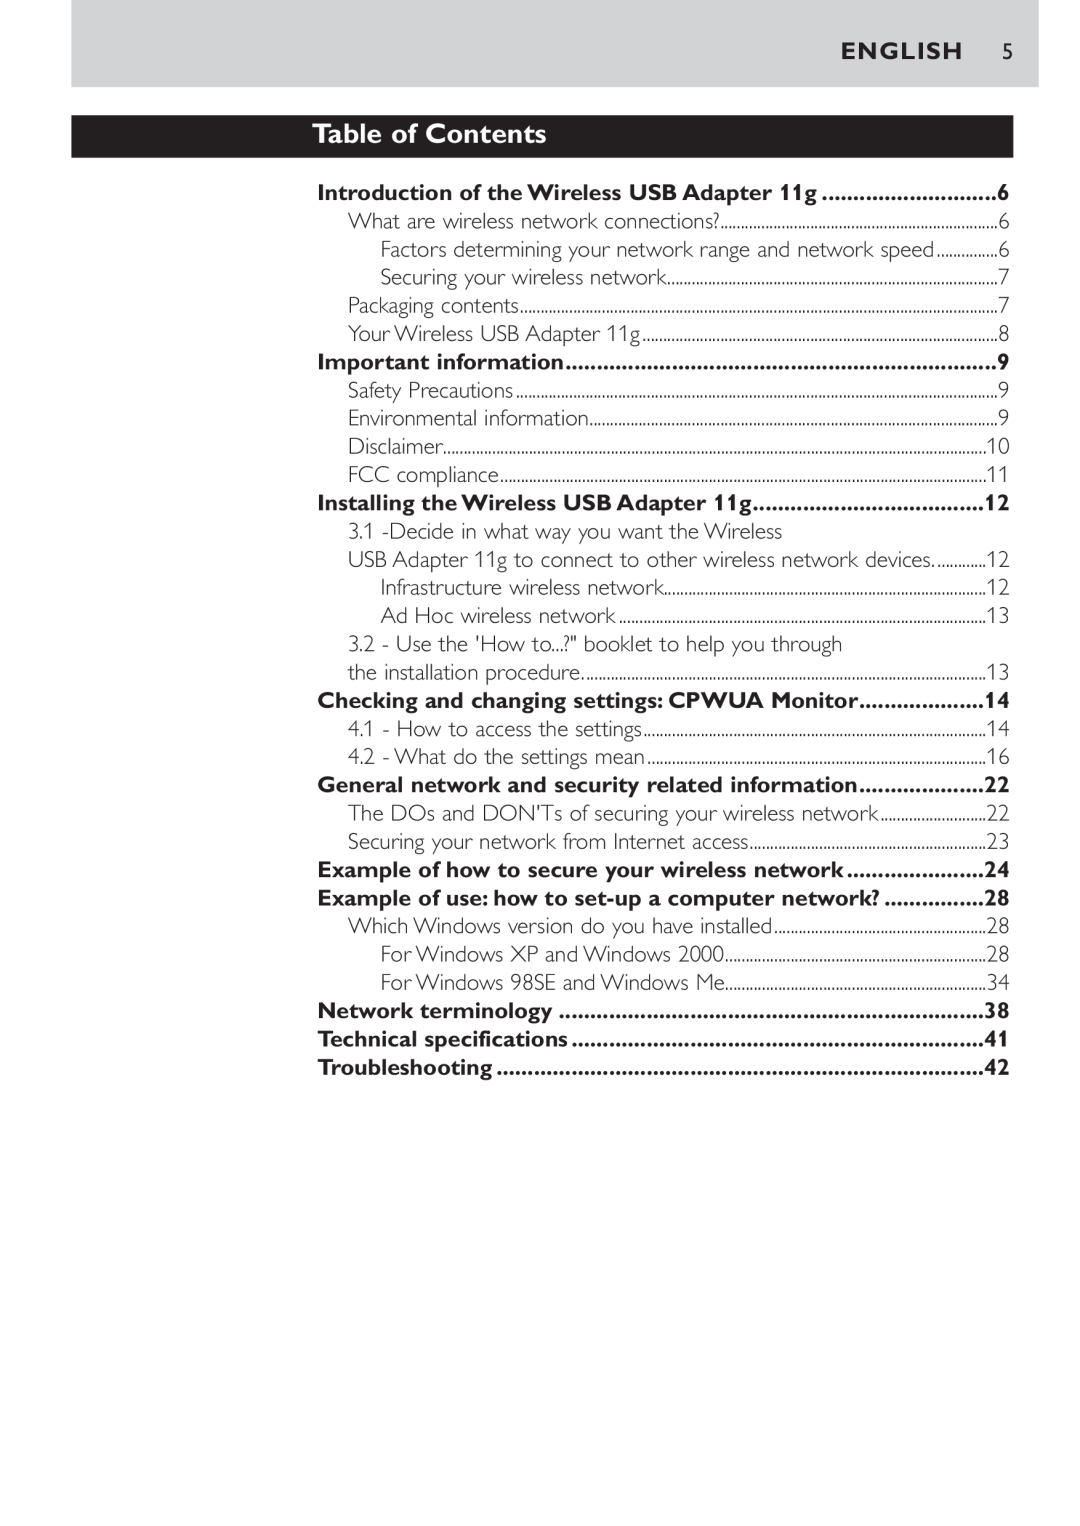 Philips CPWUA054 manual Table of Contents, English 